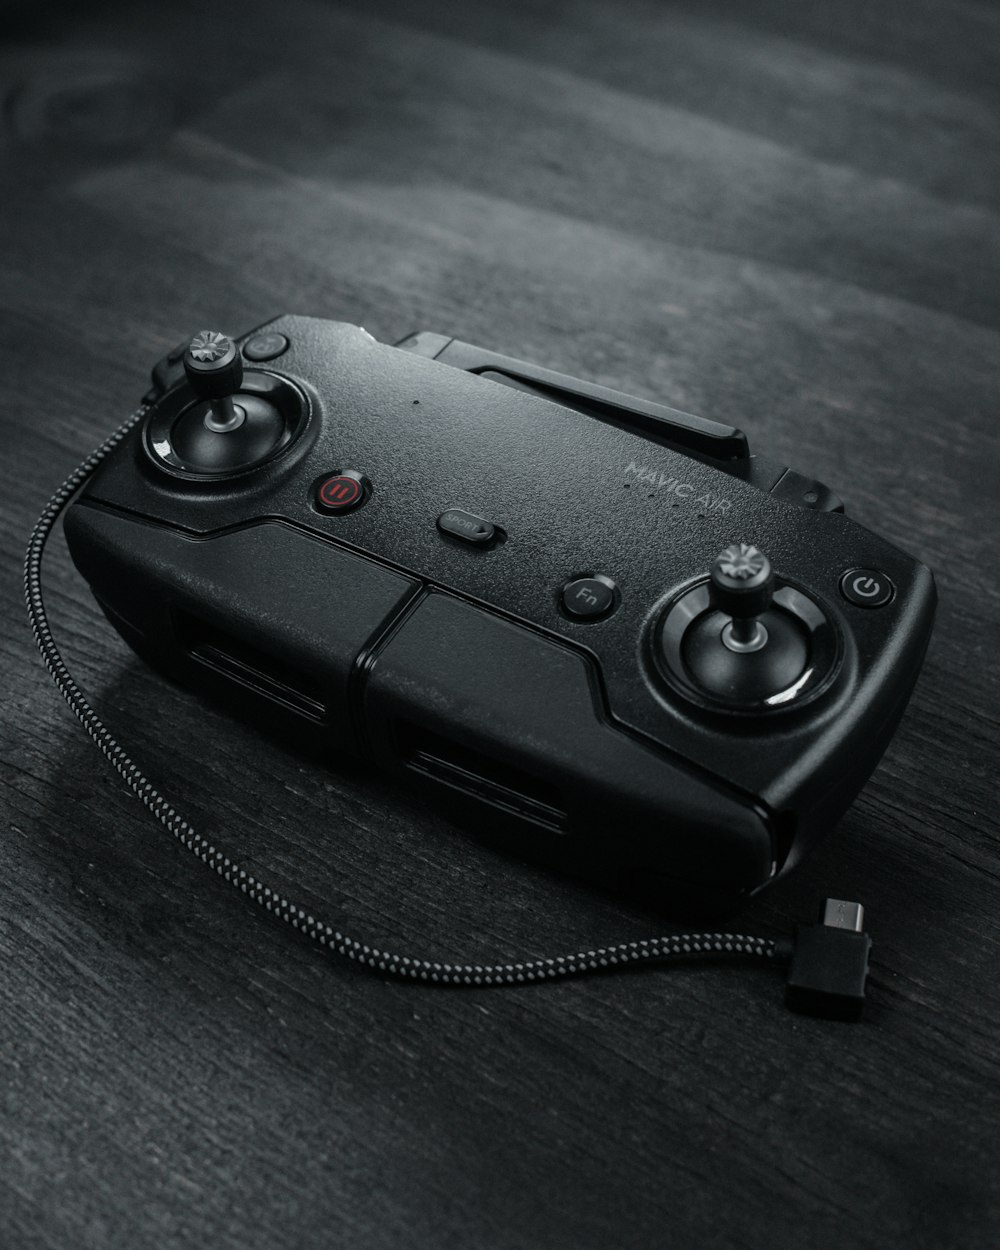 black corded game controller on black wooden table